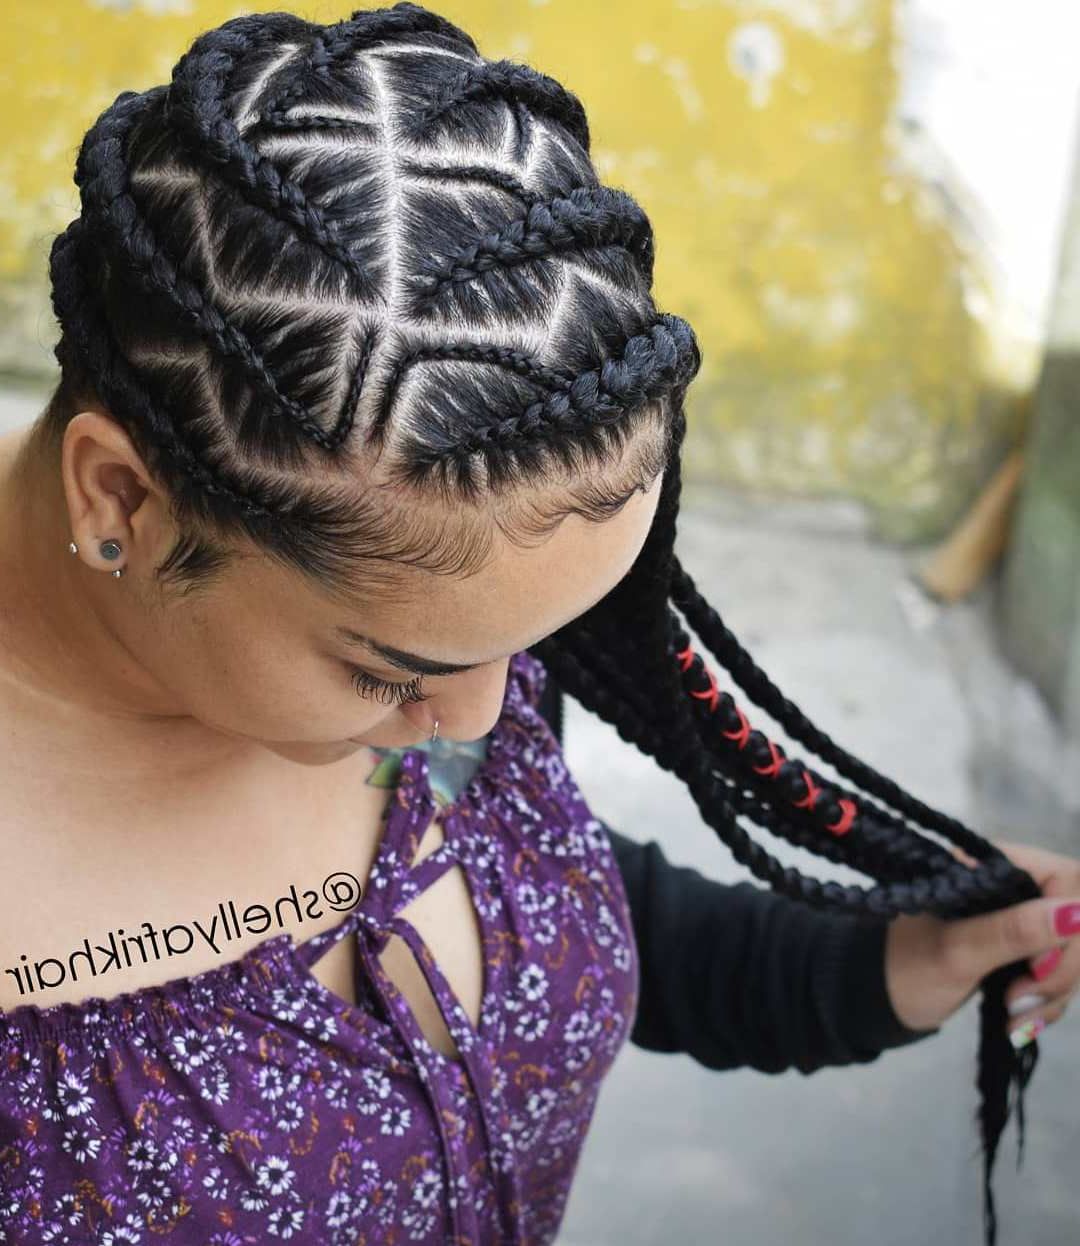 Fashionable Gold Toned Skull Cap Braided Hairstyles In 20 Head Turning Lemonade Braid Styles For All Ages (View 2 of 20)